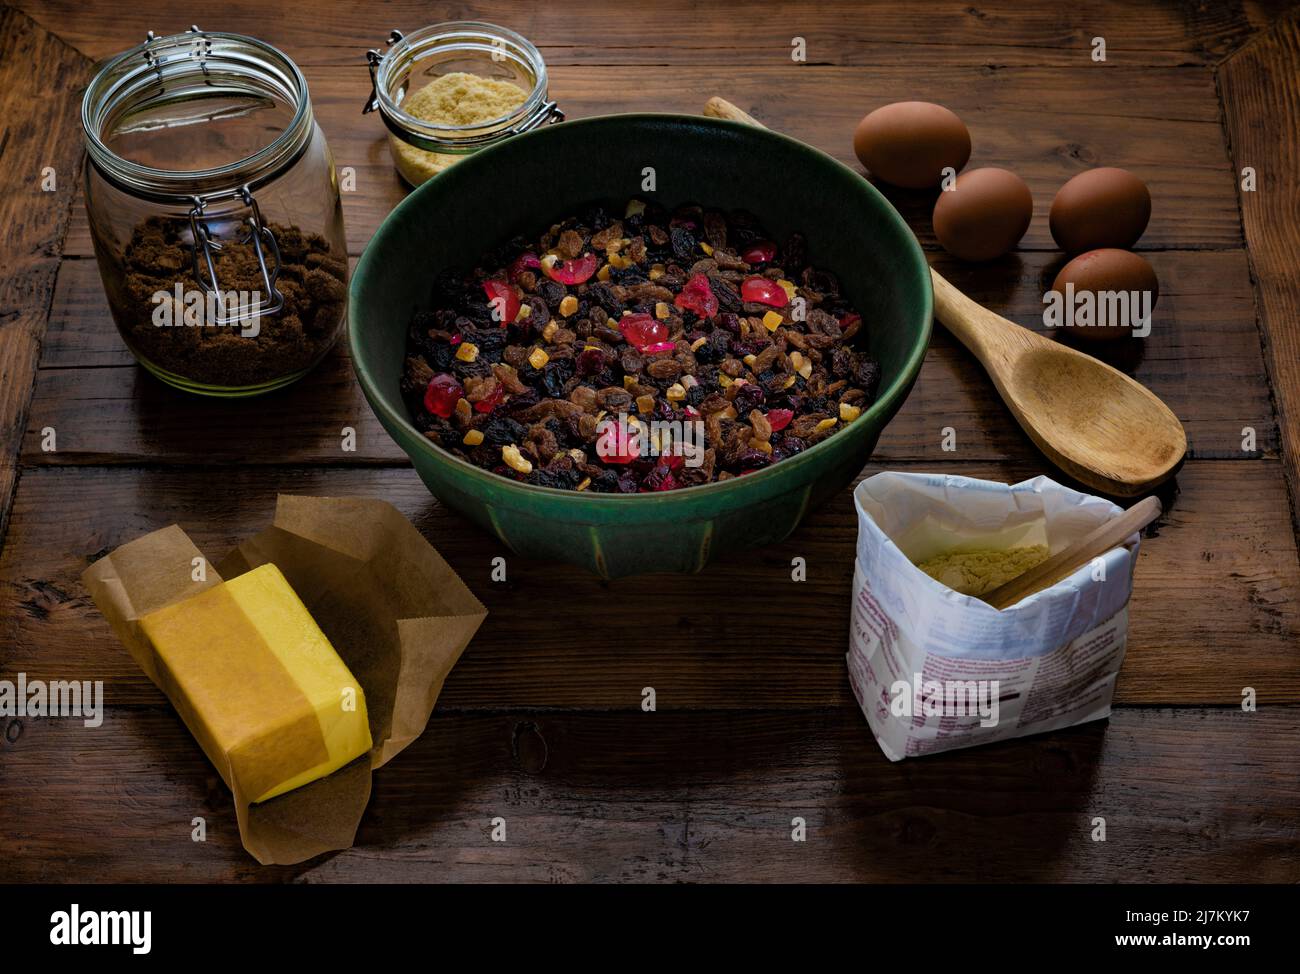 Ingredients assembled ready to make a fruit cake on a dark wooden table. Stock Photo